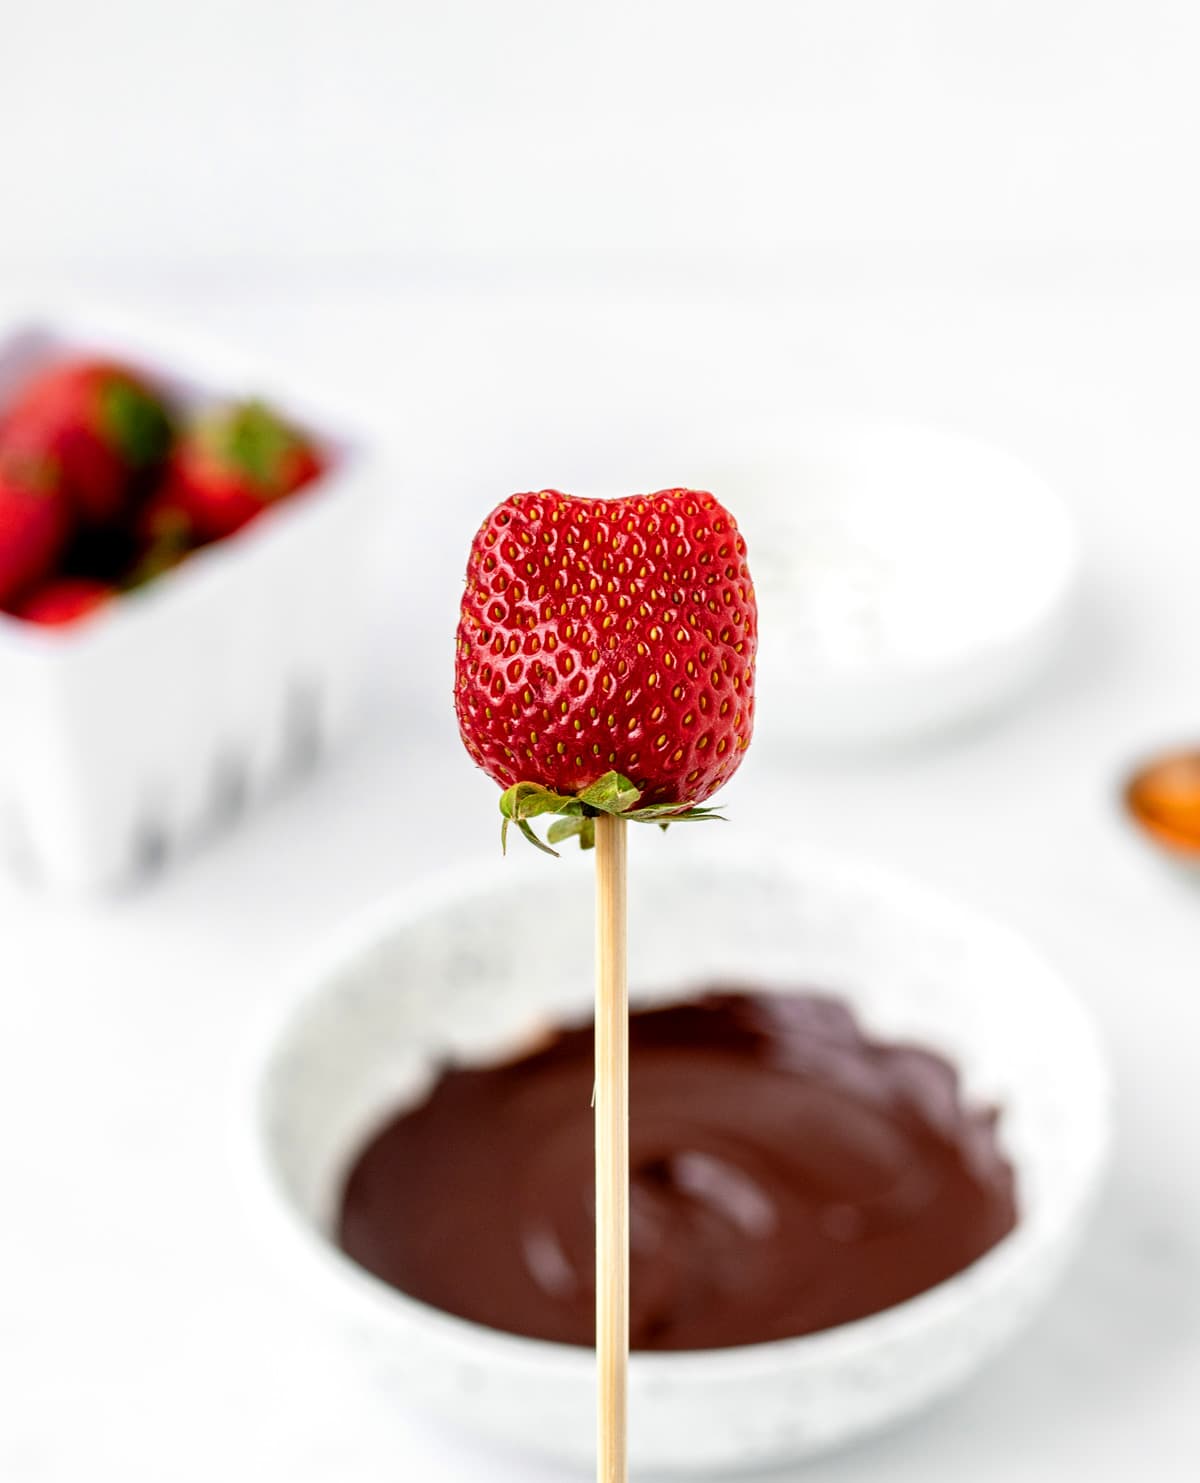 A strawberry on a wooden skewer with melted chocolate in white bowl in the background.